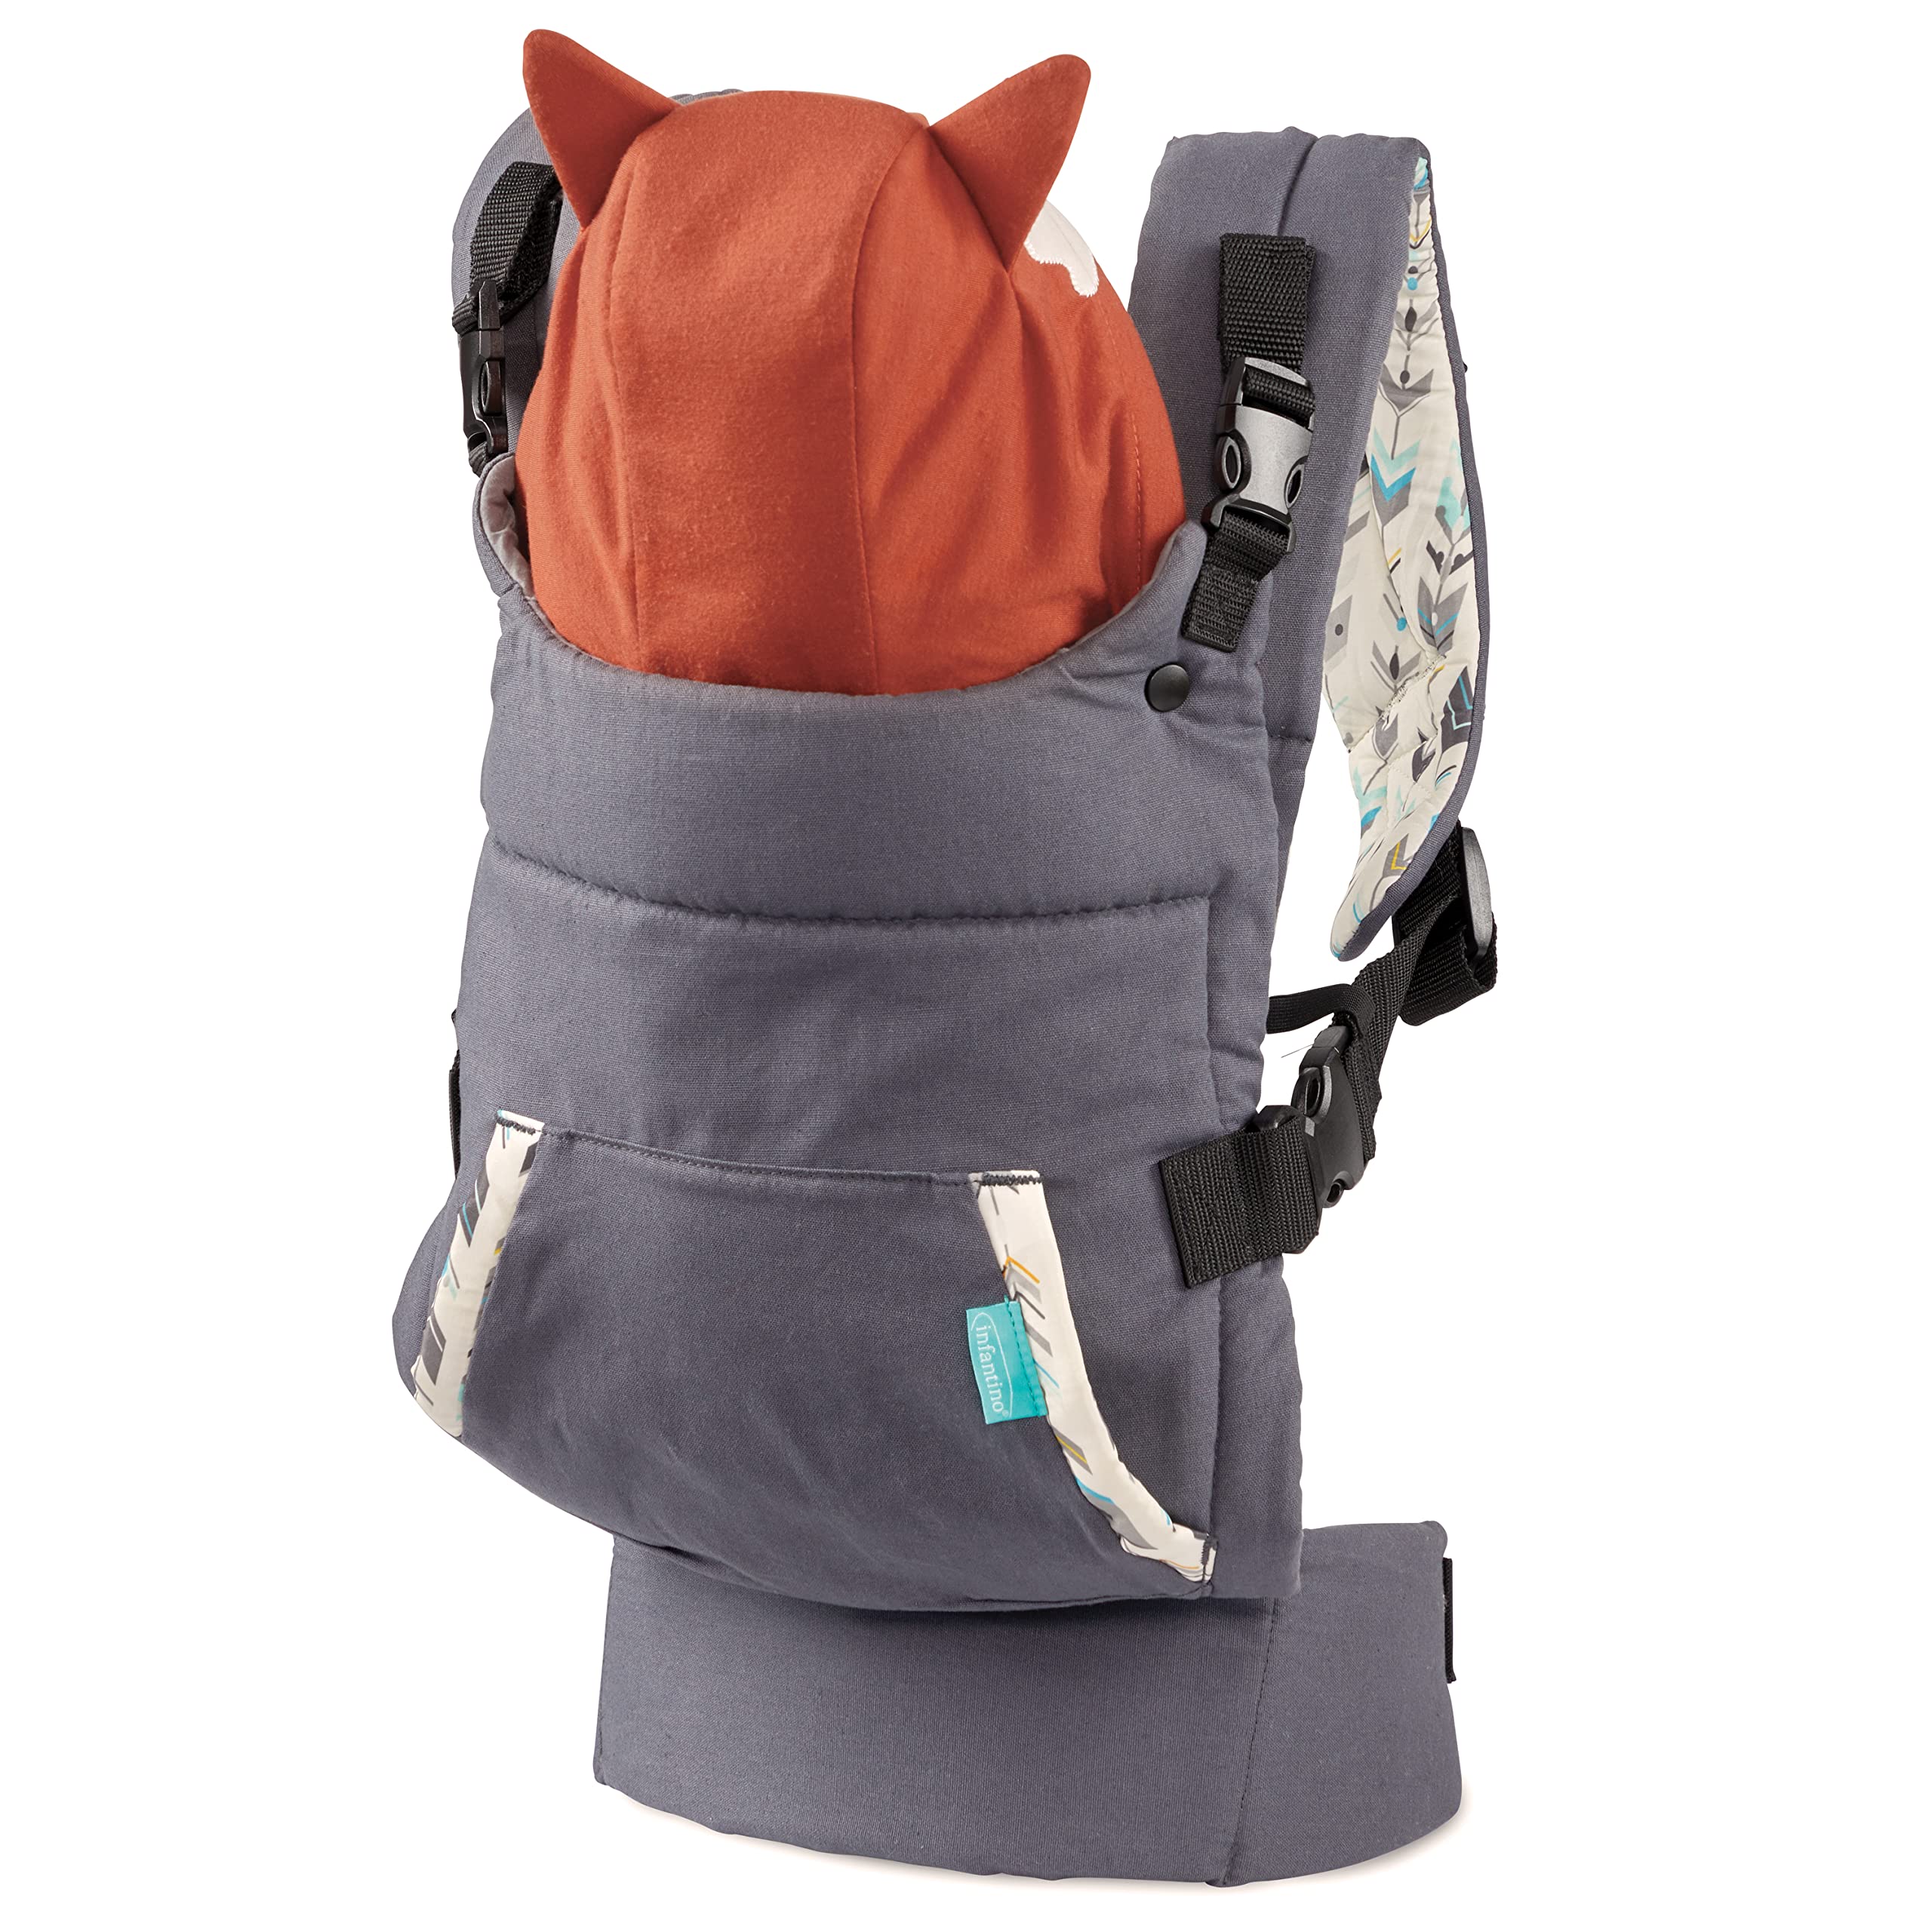 Infantino Cuddle Up Carrier - Ergonomic Fox-Themed face-in Front Carry and Back Carry with Removable Character Hood for Infants and Toddlers 12-40 lbs